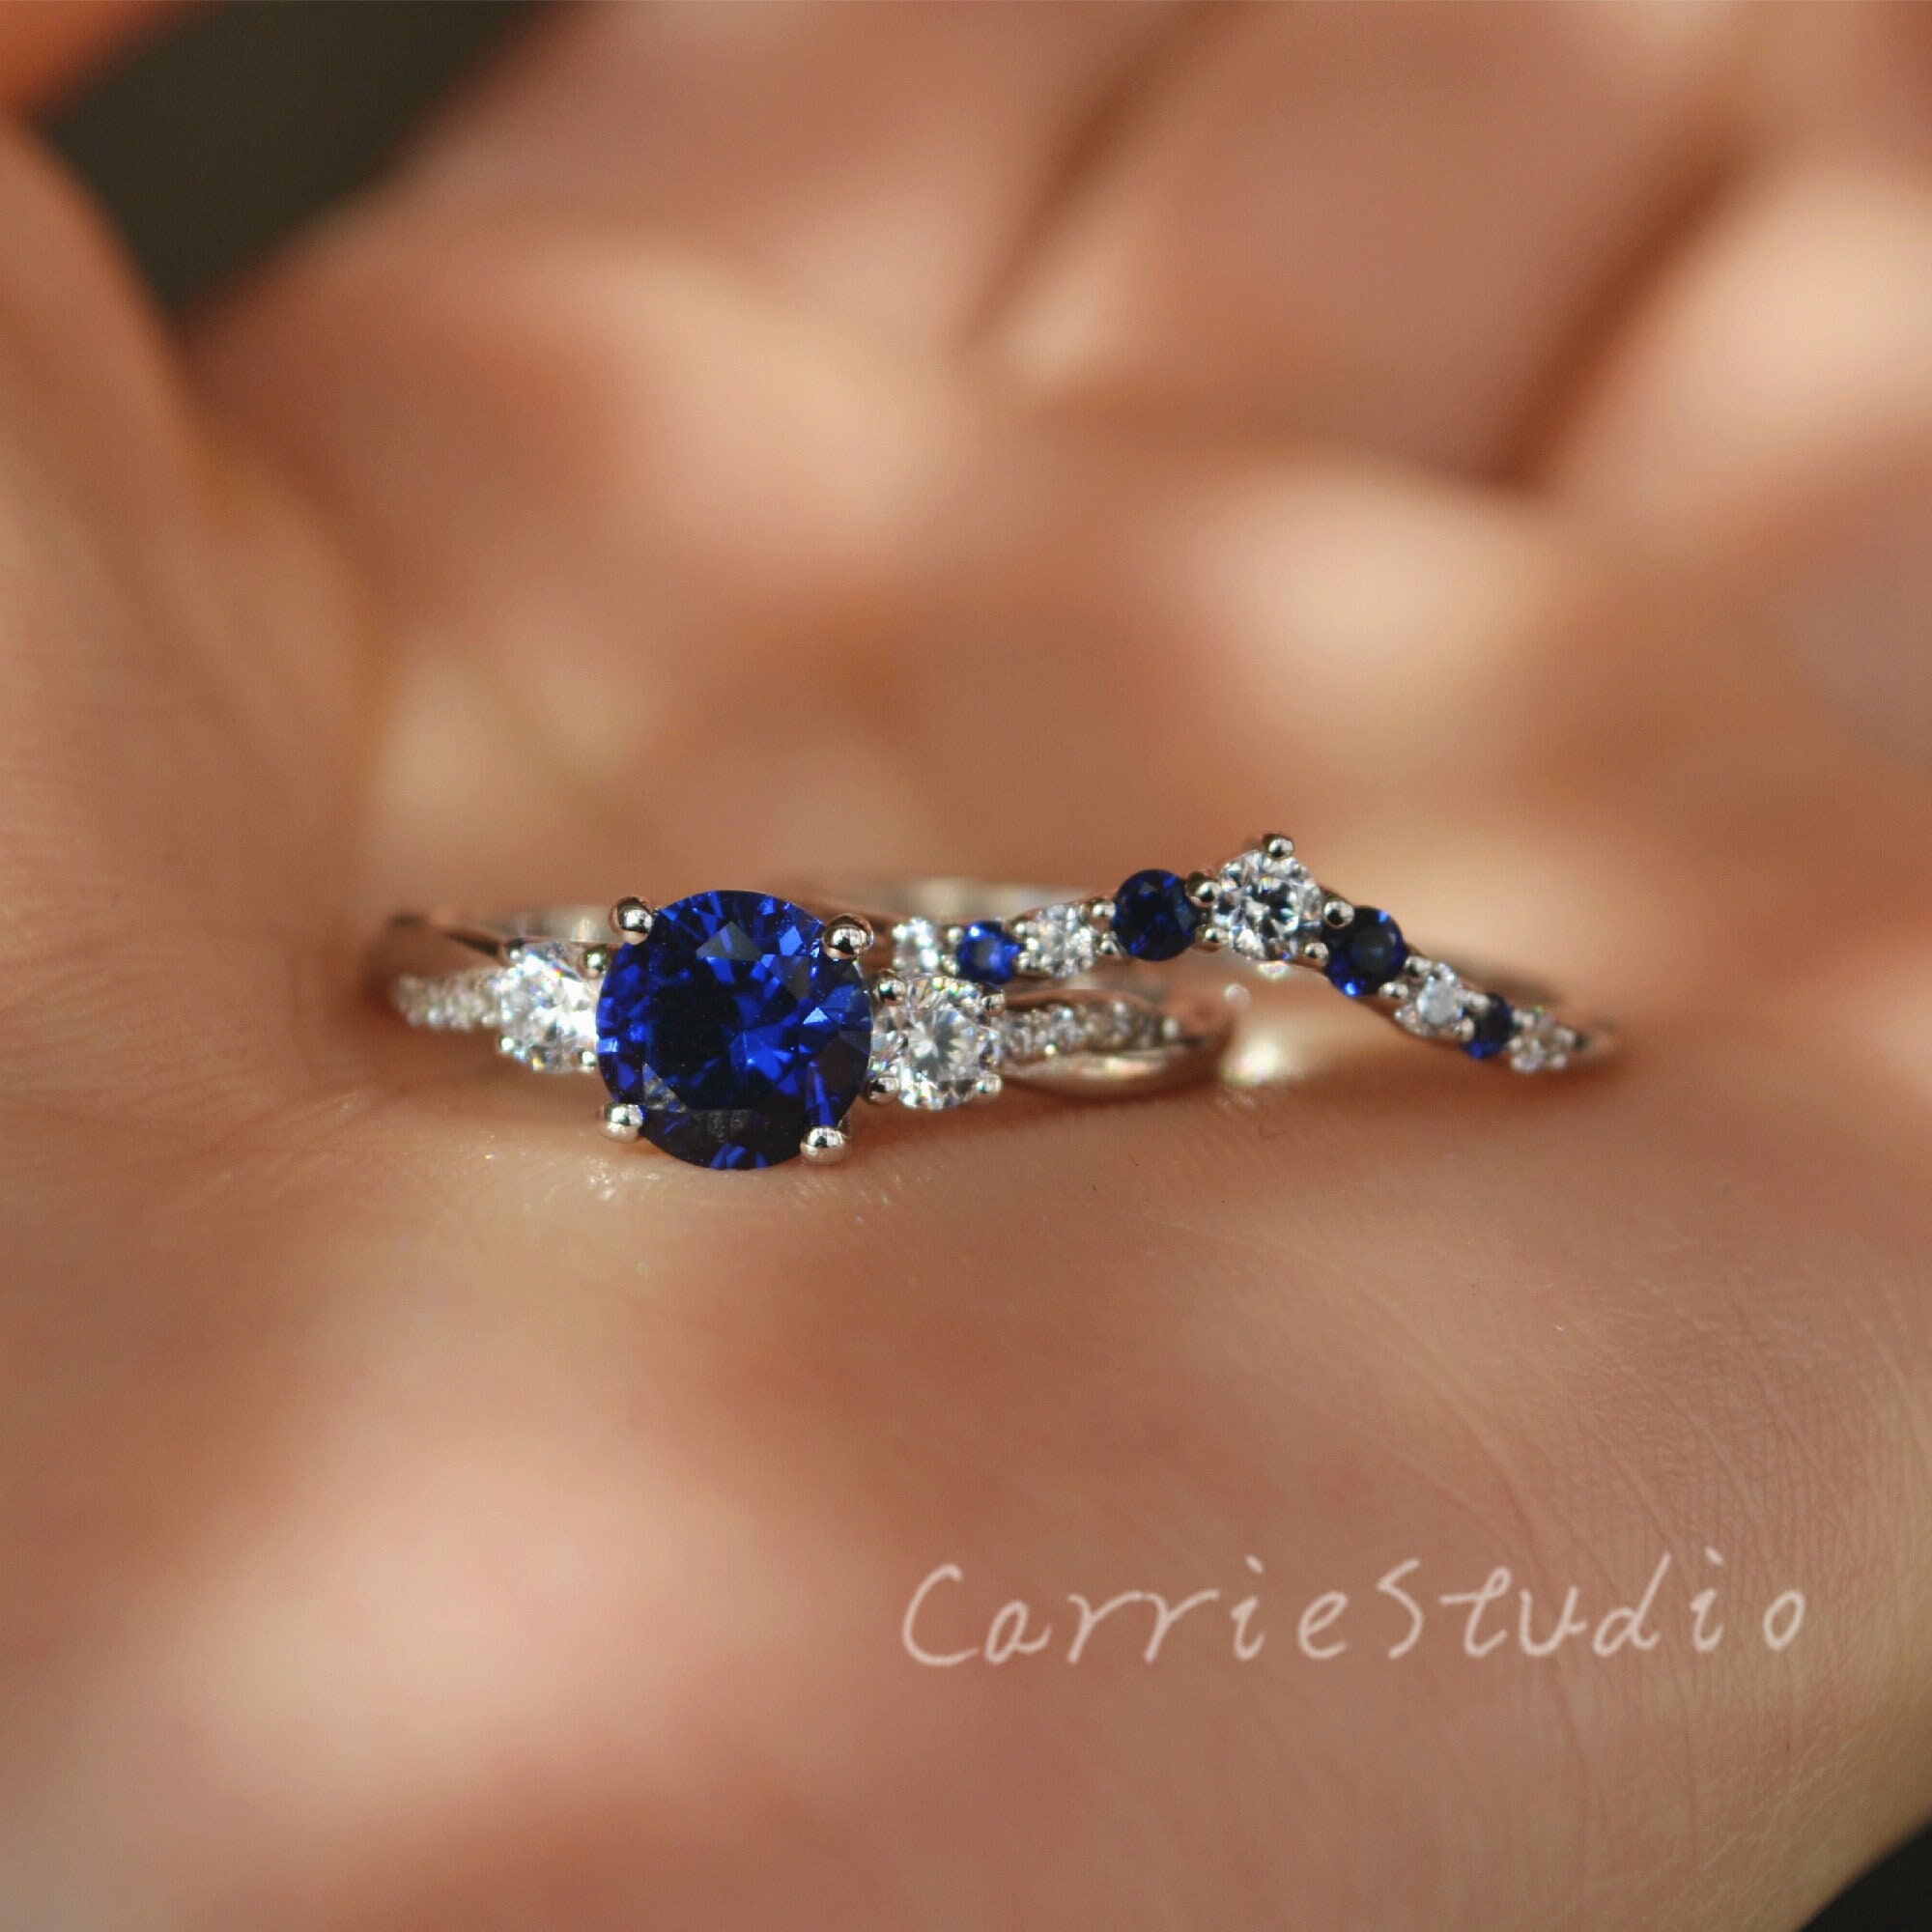 Engagement Ring | My sapphire was loose so I took it in for … | Flickr